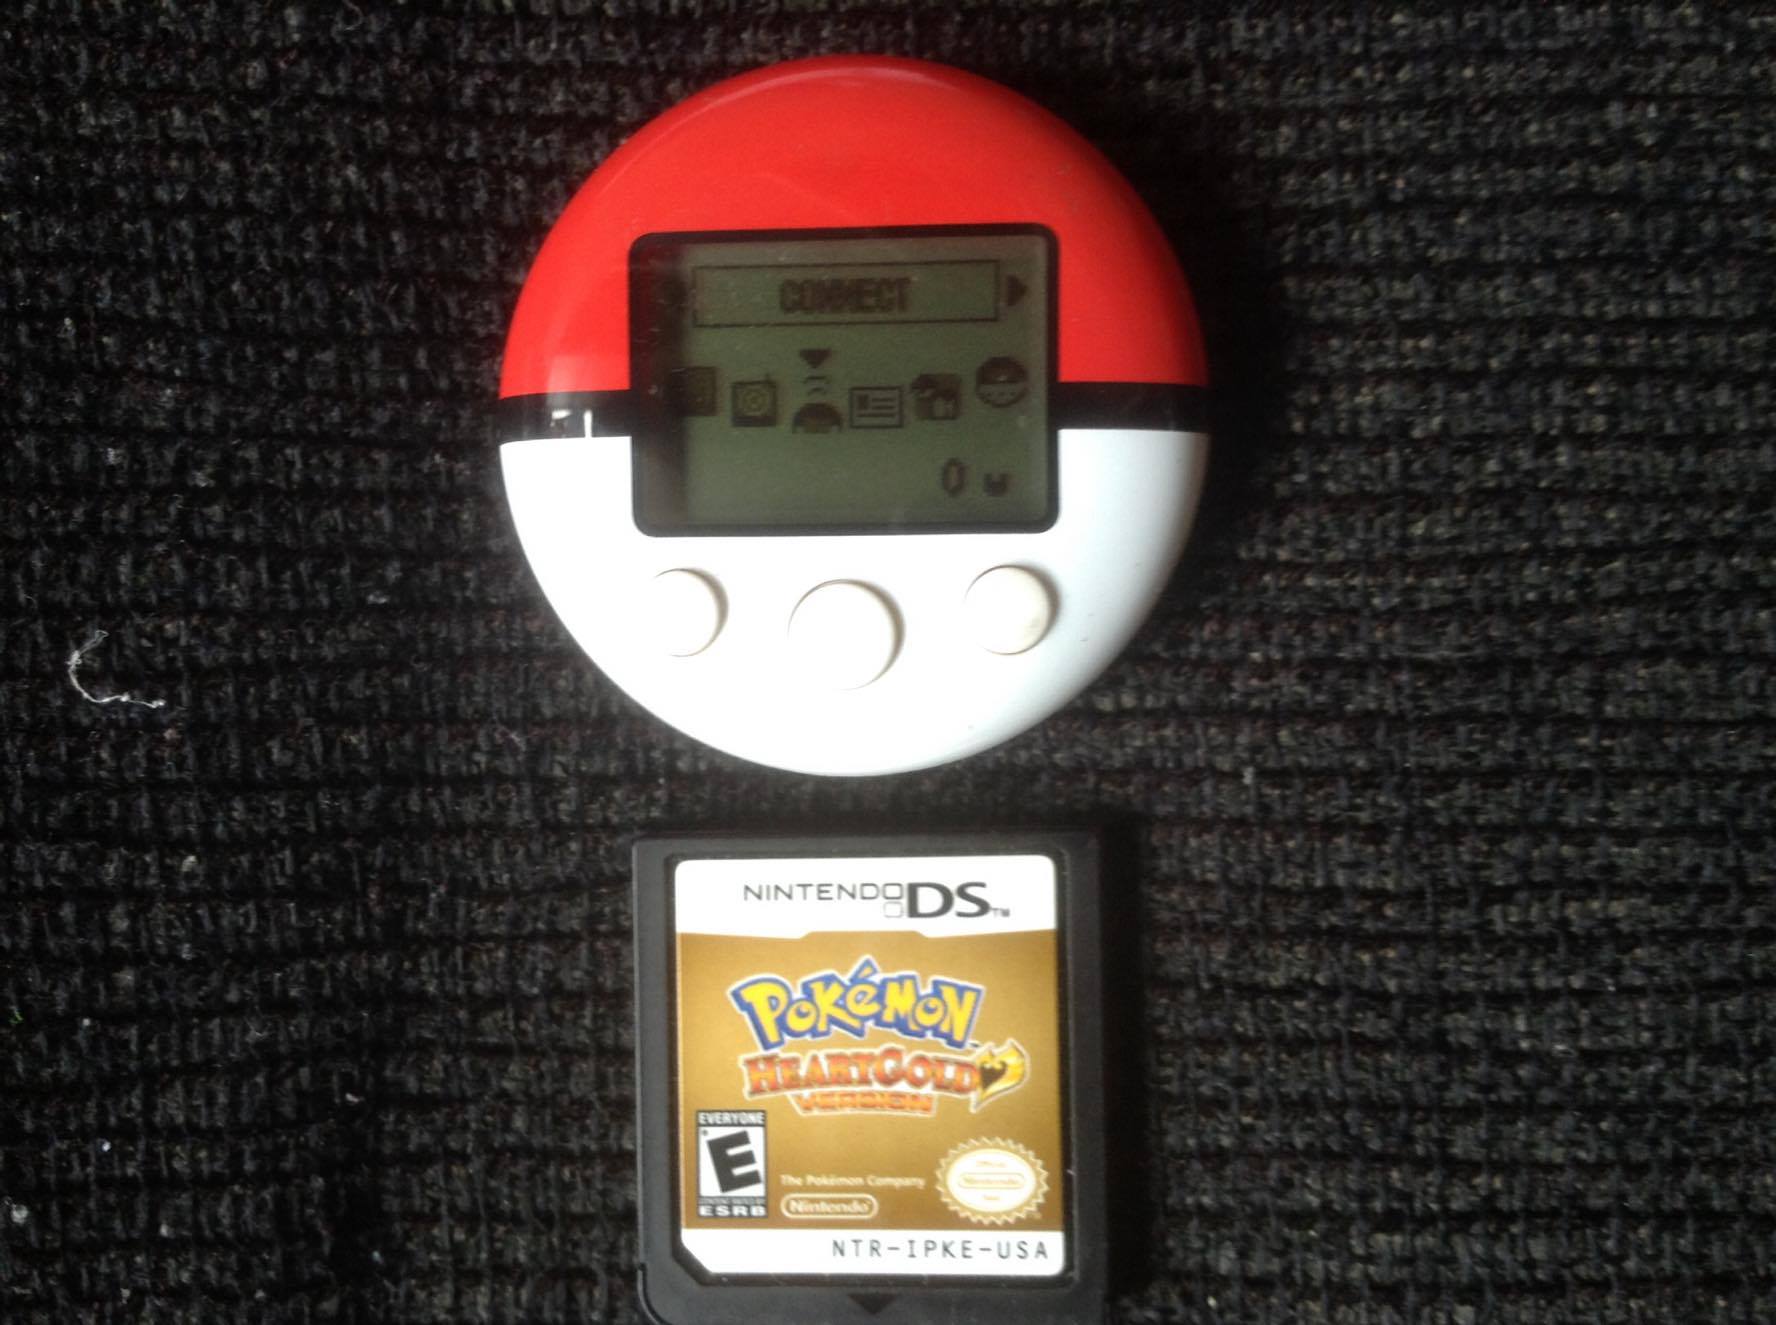 heartgold with pokewalker